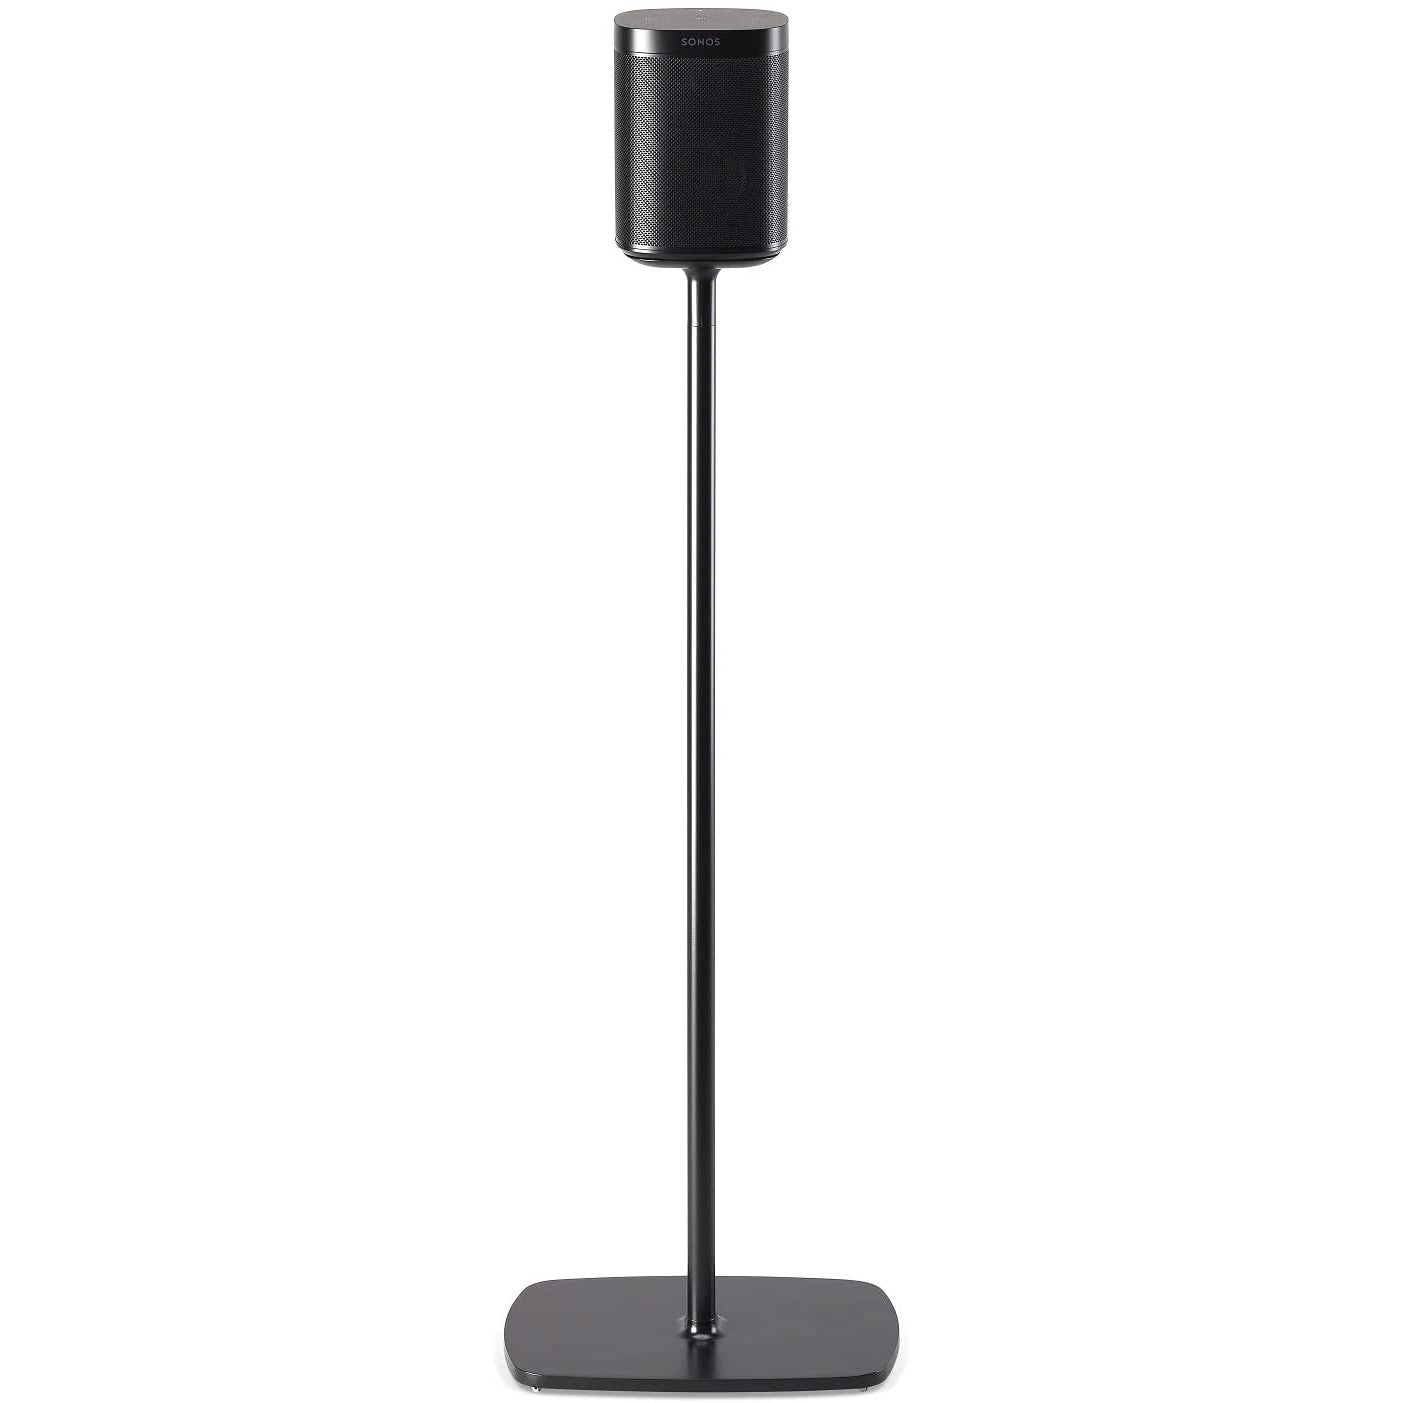 Flexson Floor Stand for Sonos One, One SL and Play:1 - Black or White (Single)